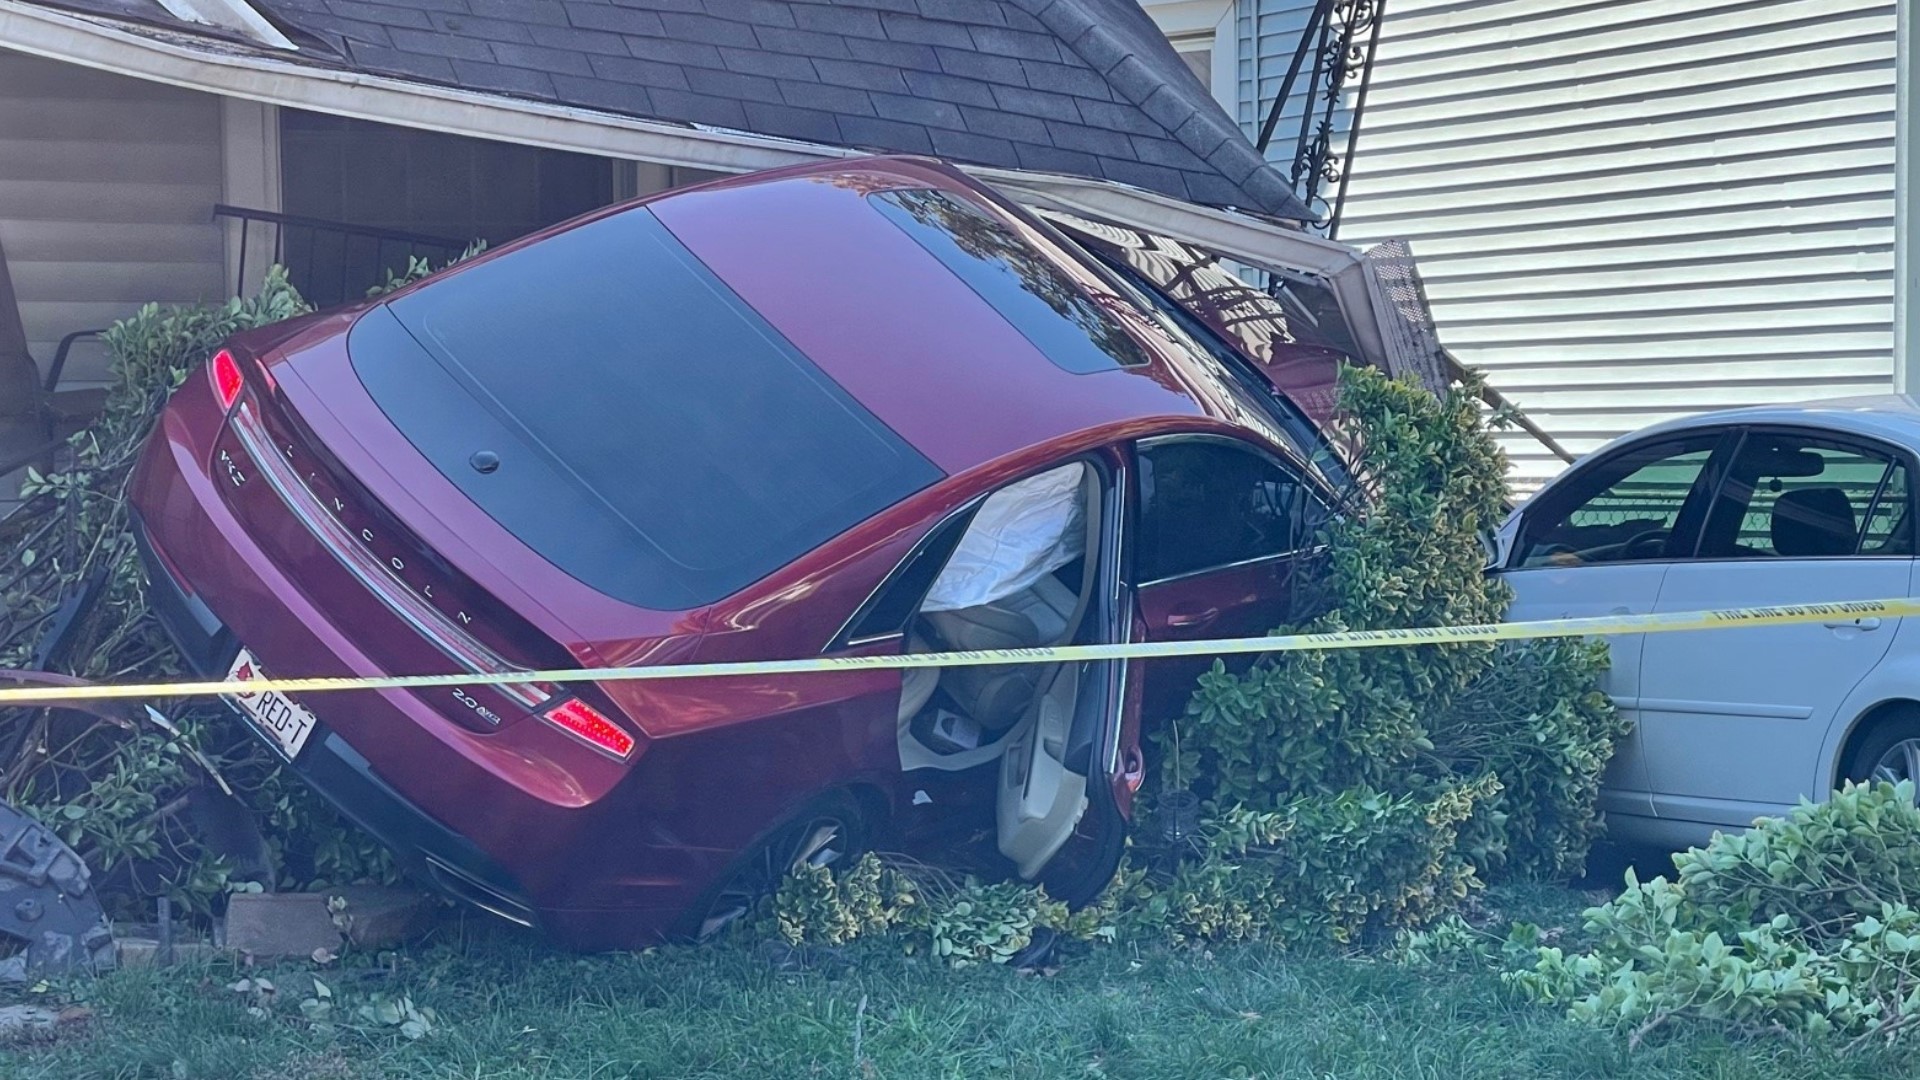 It was a close call for some Louisville homeowners when a car crashed into a house in Parkland.